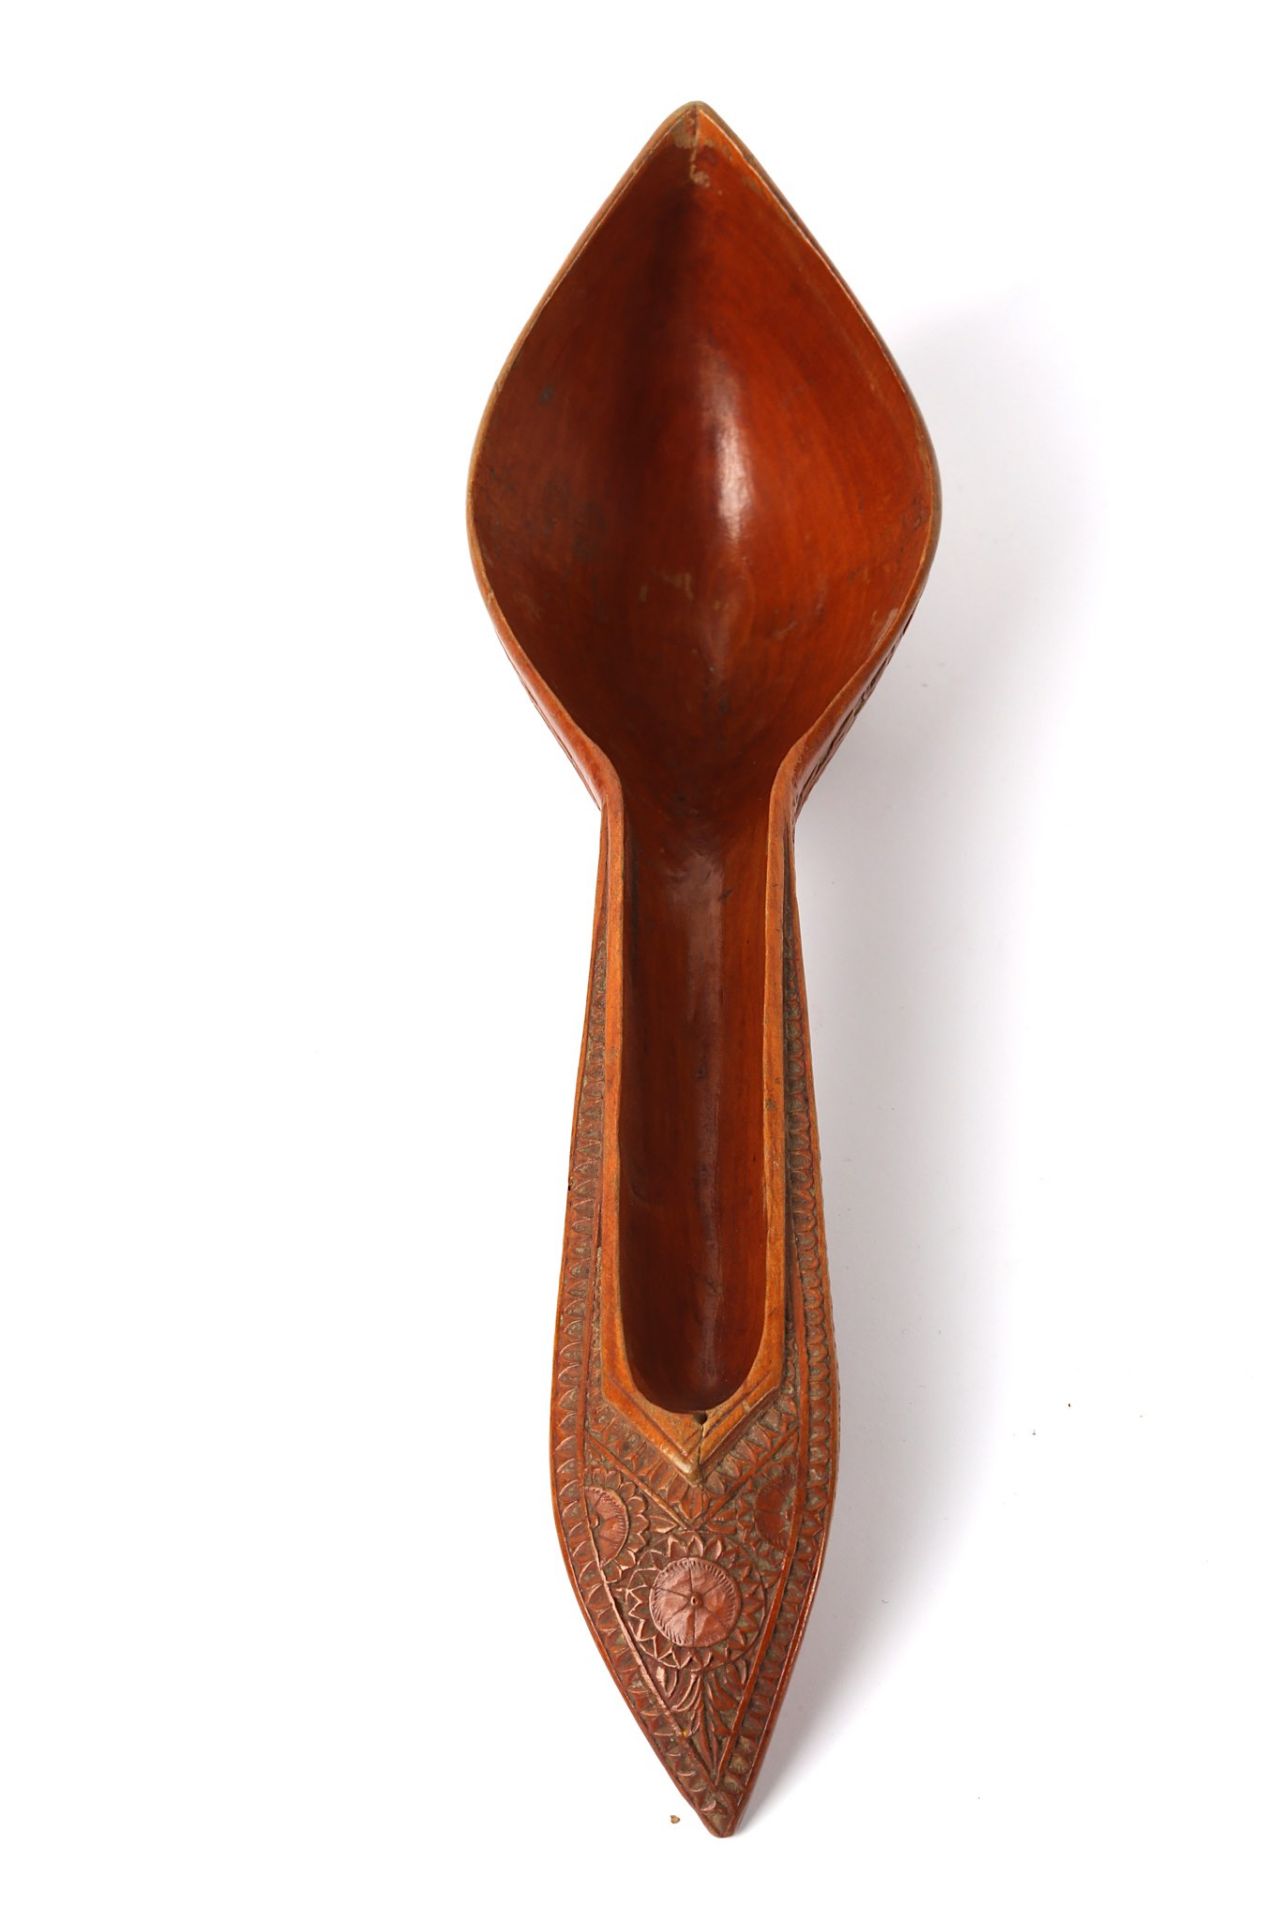 A CARVED WOOD SPOON (QASHUQ) Possibly Abadeh, Iran, late 19th century Of typical form with boat- - Image 3 of 4